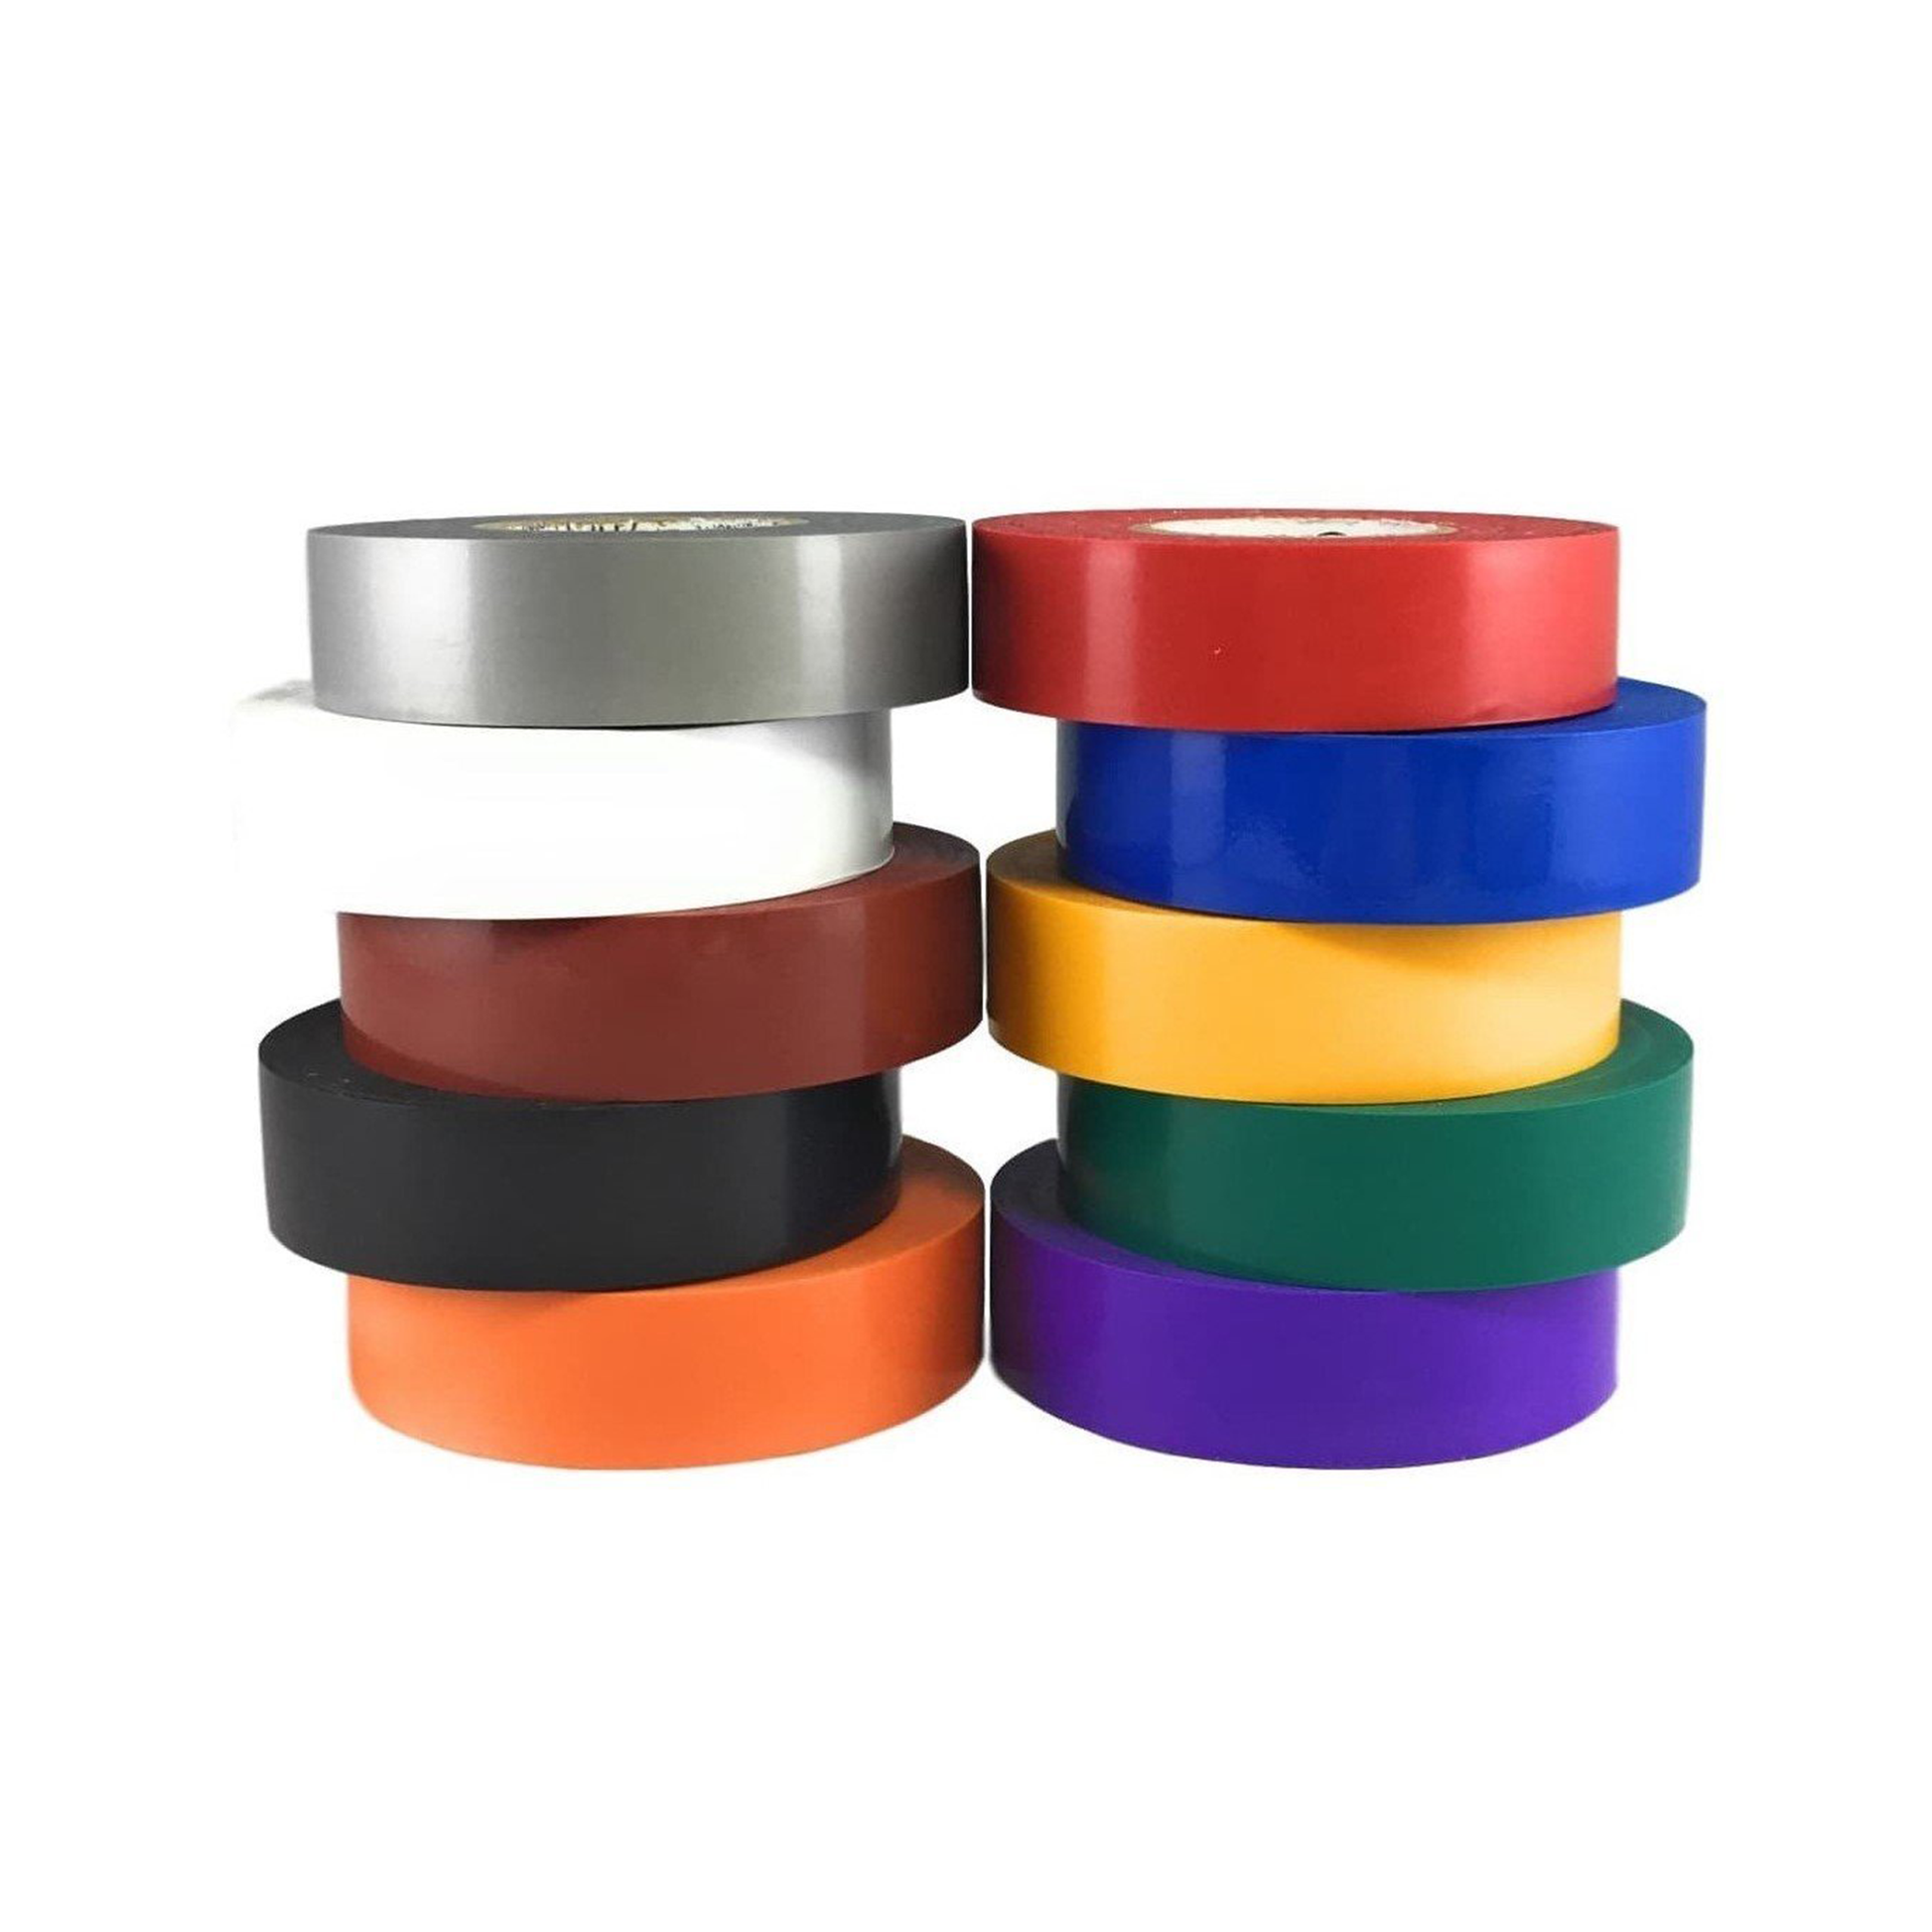 TradeGear Electrical Tape (10PK) Assorted Matte Rainbow Colors –  Waterproof, Flame-Retardant, Rubber Based Adhesive, UL Listed – Rated for  Max. 600V